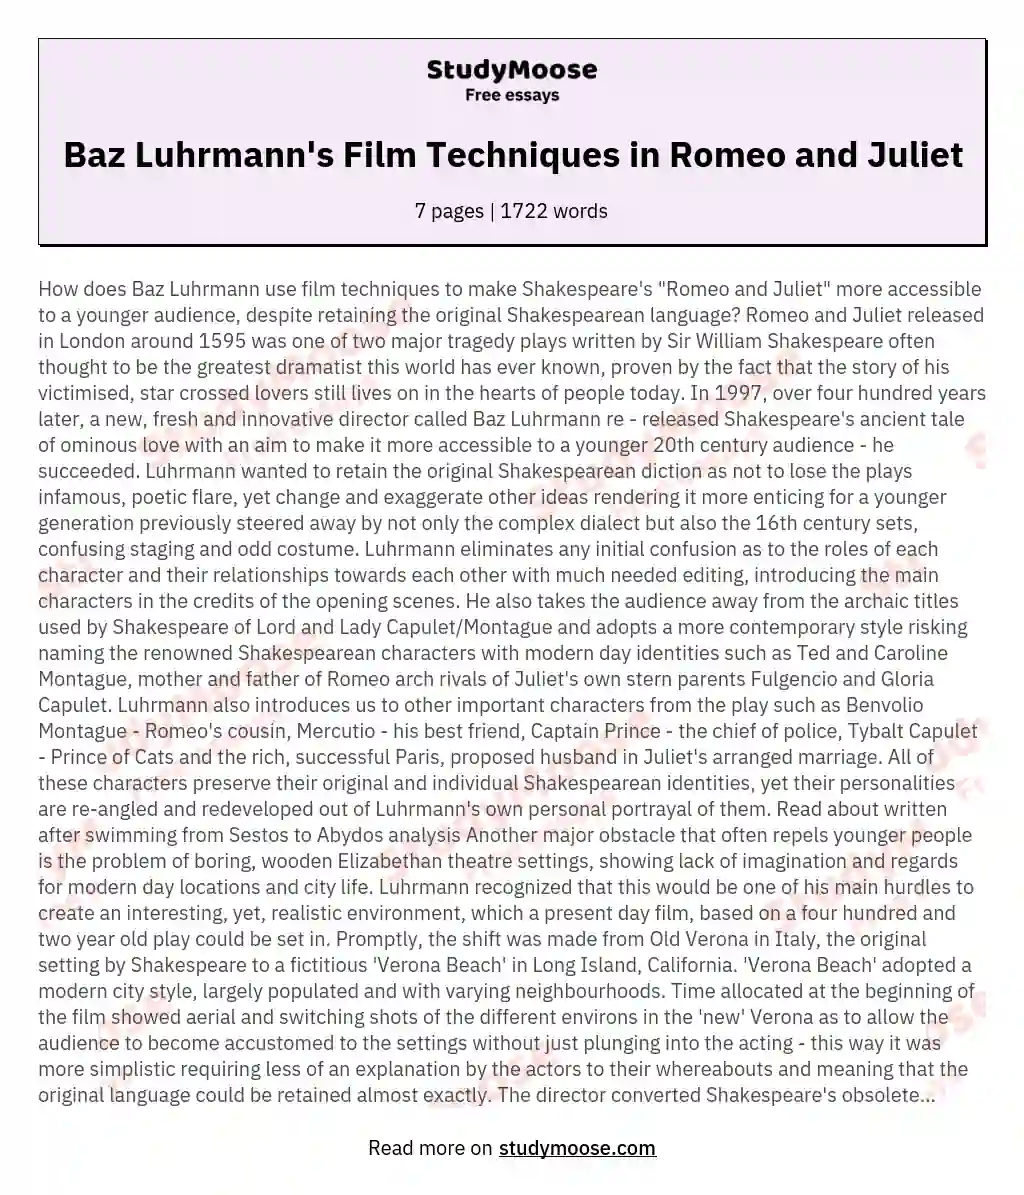 Baz Luhrmann's Film Techniques in Romeo and Juliet